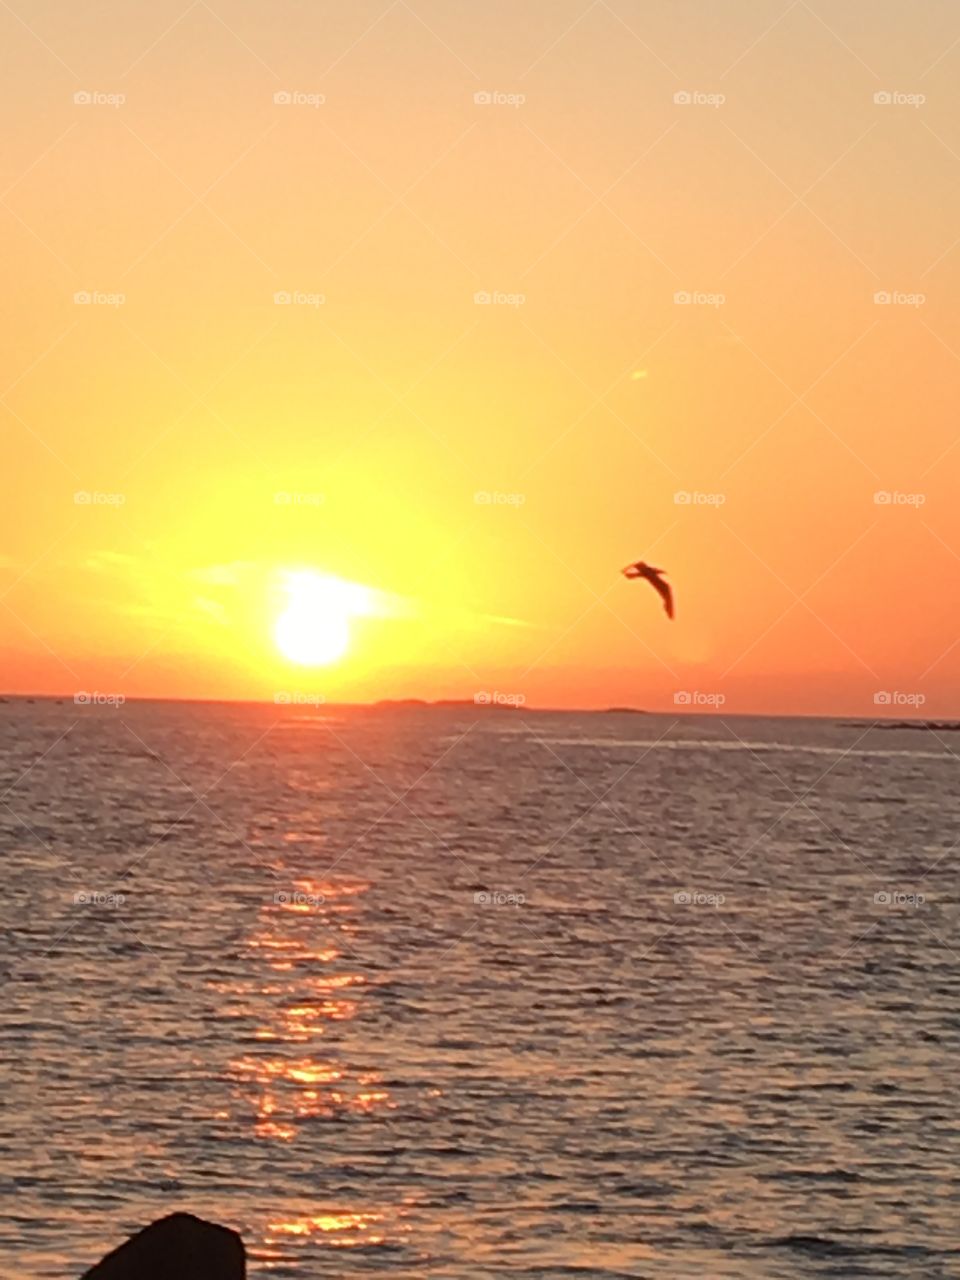 Seagull and du sunset.